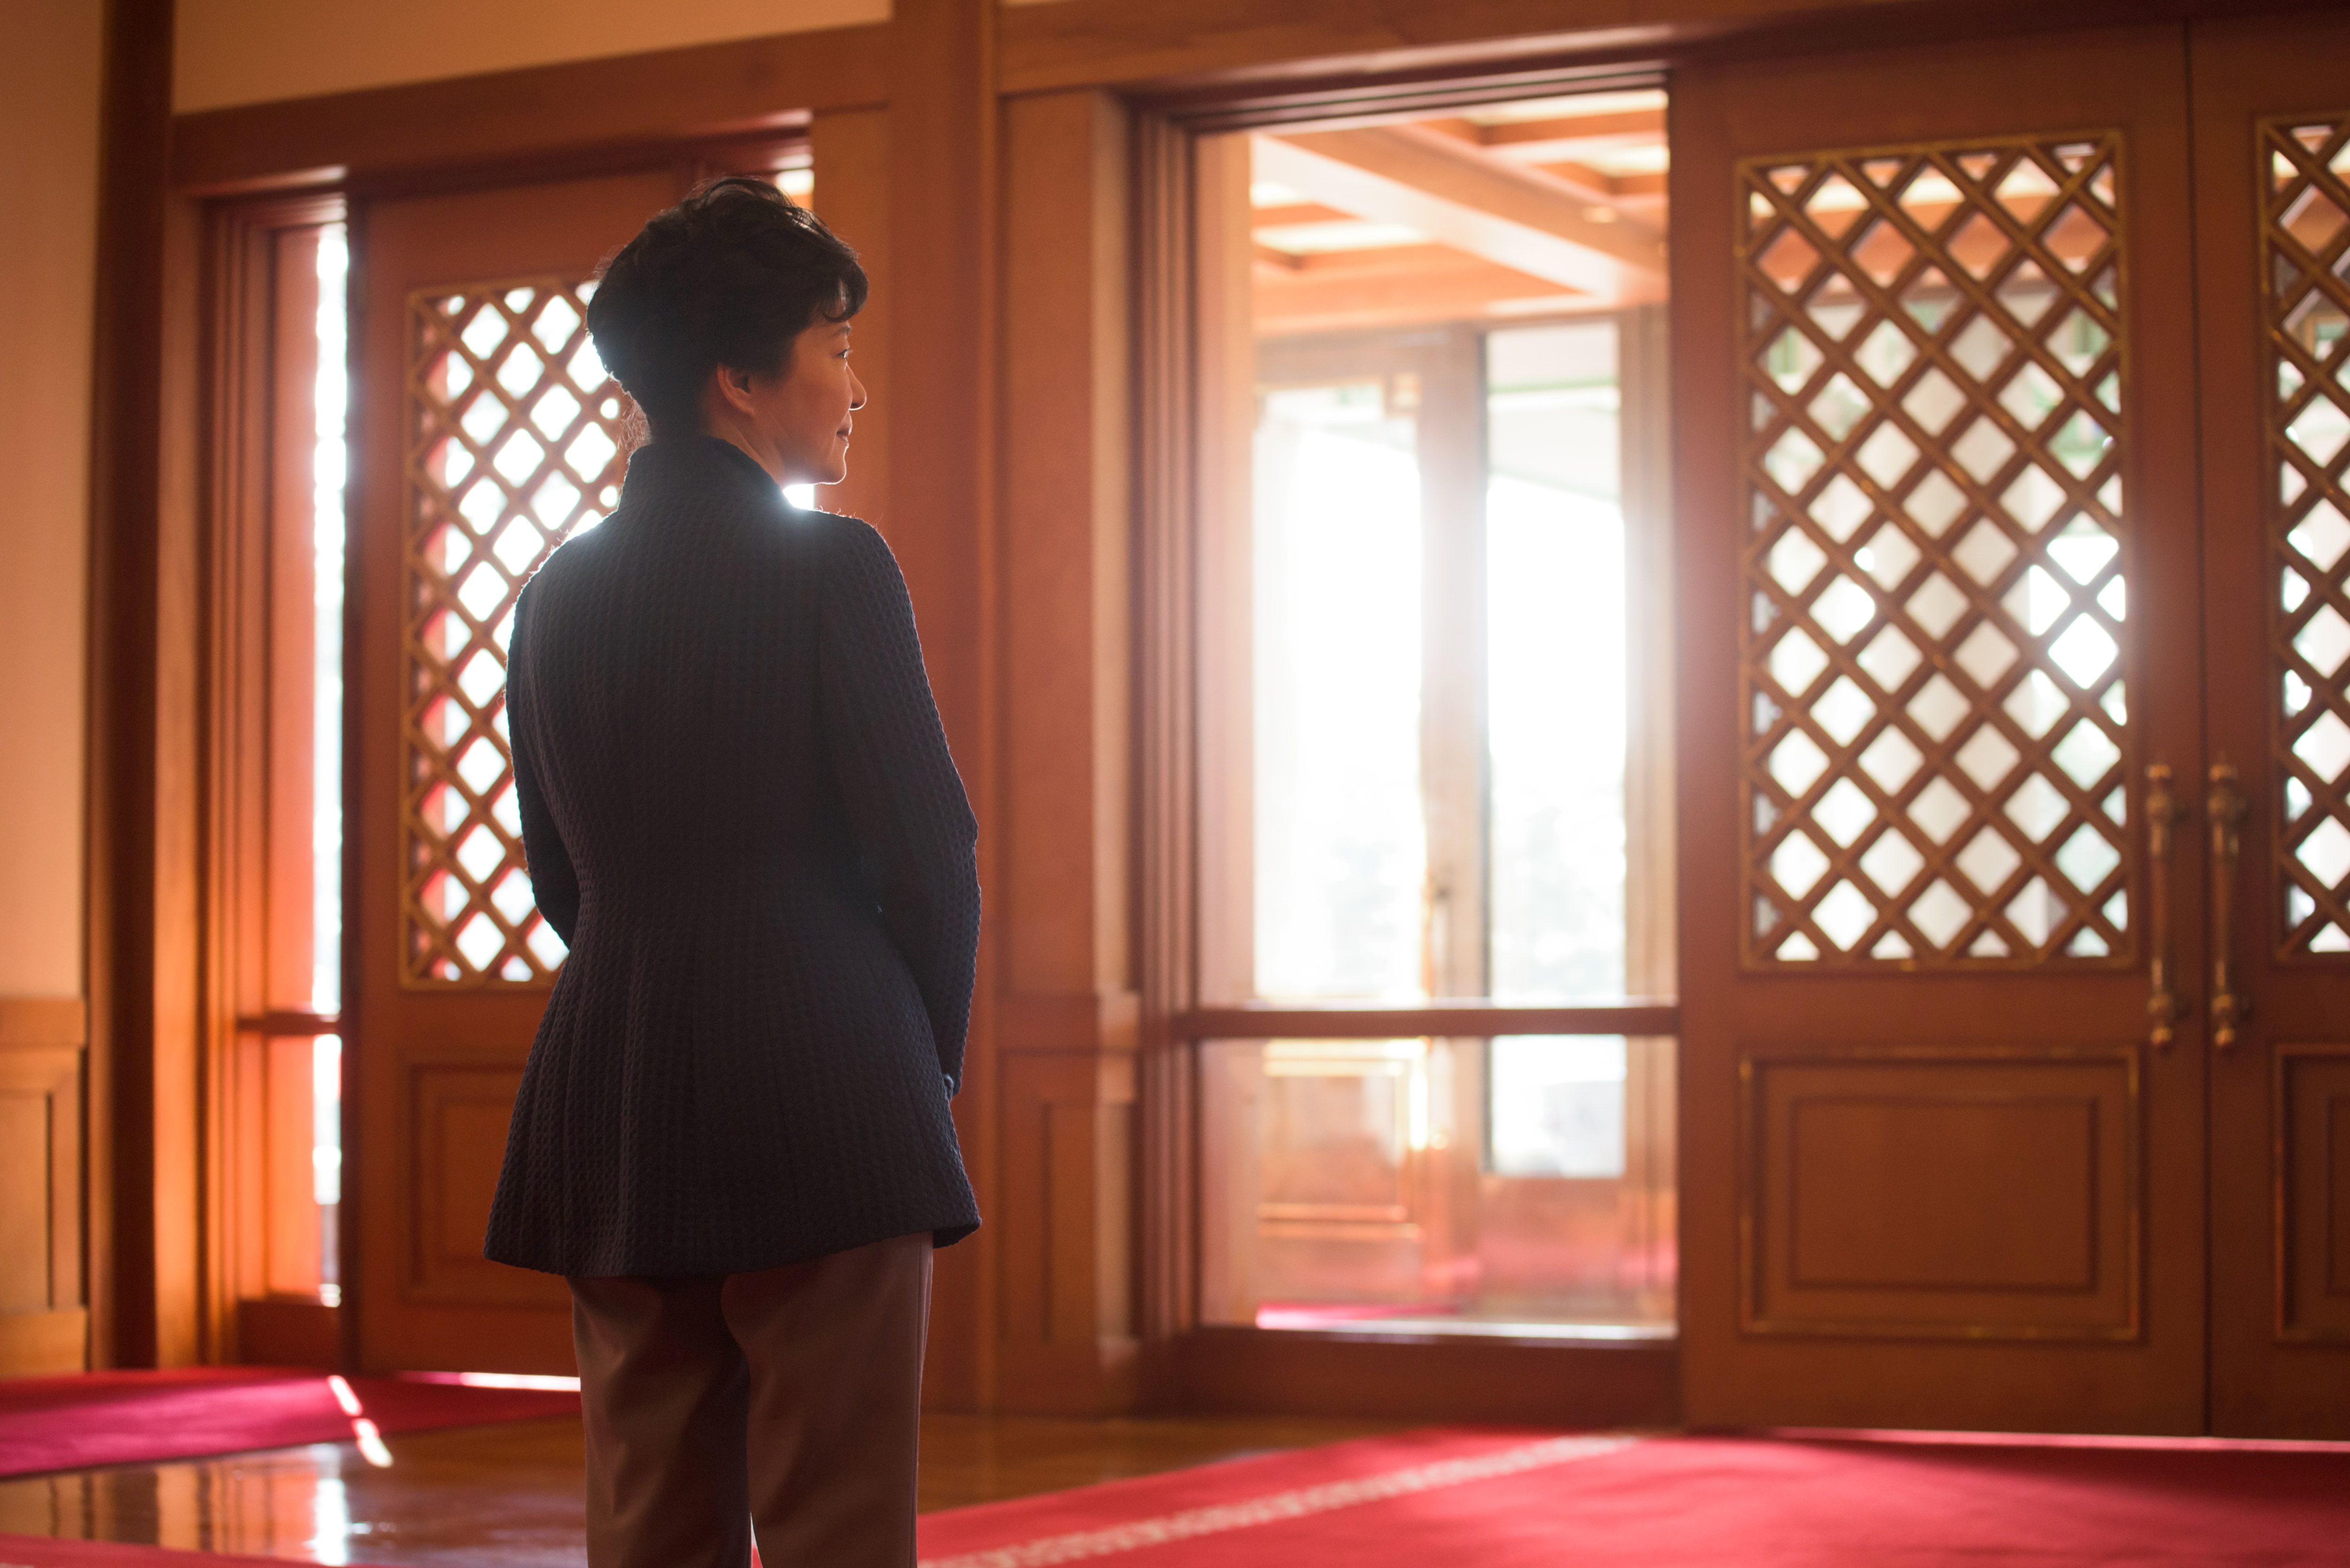 (FILES) This file photo taken on February 26, 2015 shows South Korea's President Park Geun-Hye at the presidential Blue House in Seoul. Park was to address the nation on November 4, 2016 over a corruption scandal that has engulfed her administration and triggered the arrest of a close personal friend accused of meddling in state affairs. / AFP PHOTO / ED JONES